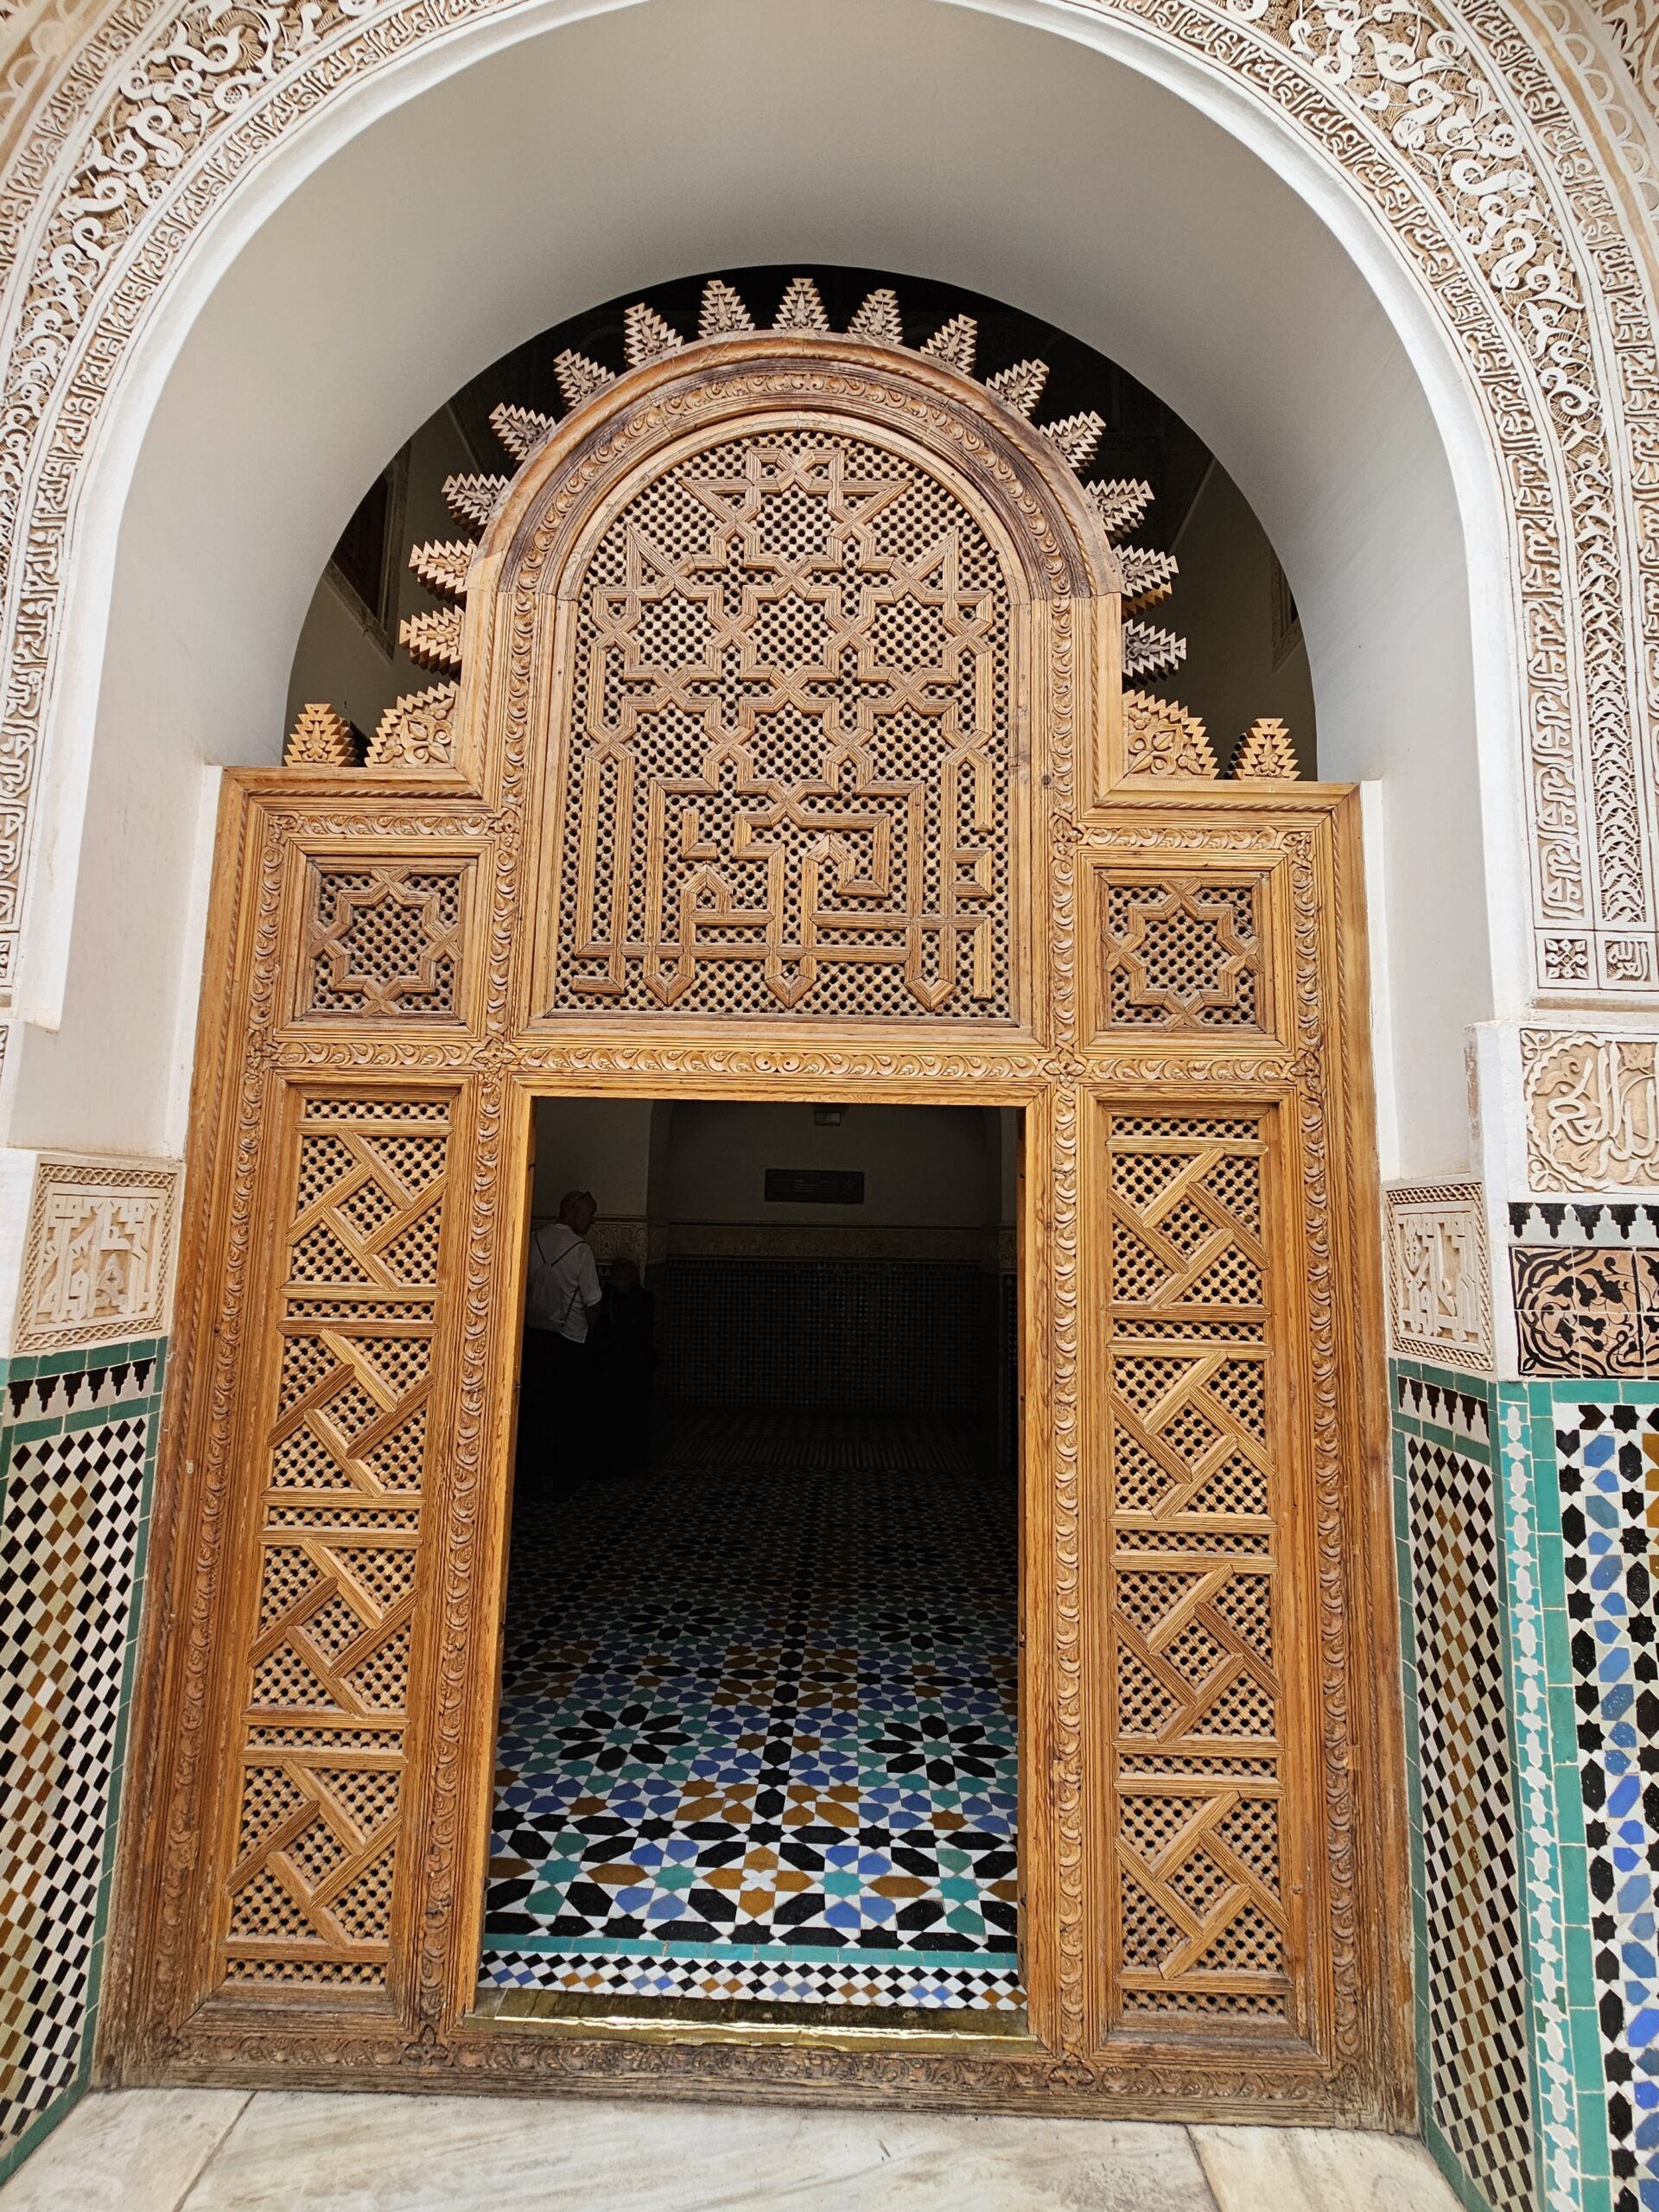 A carved wooded door and alcove with carvings at the top section and coloured mosaic at the lower third. Image by 360onhistory.com